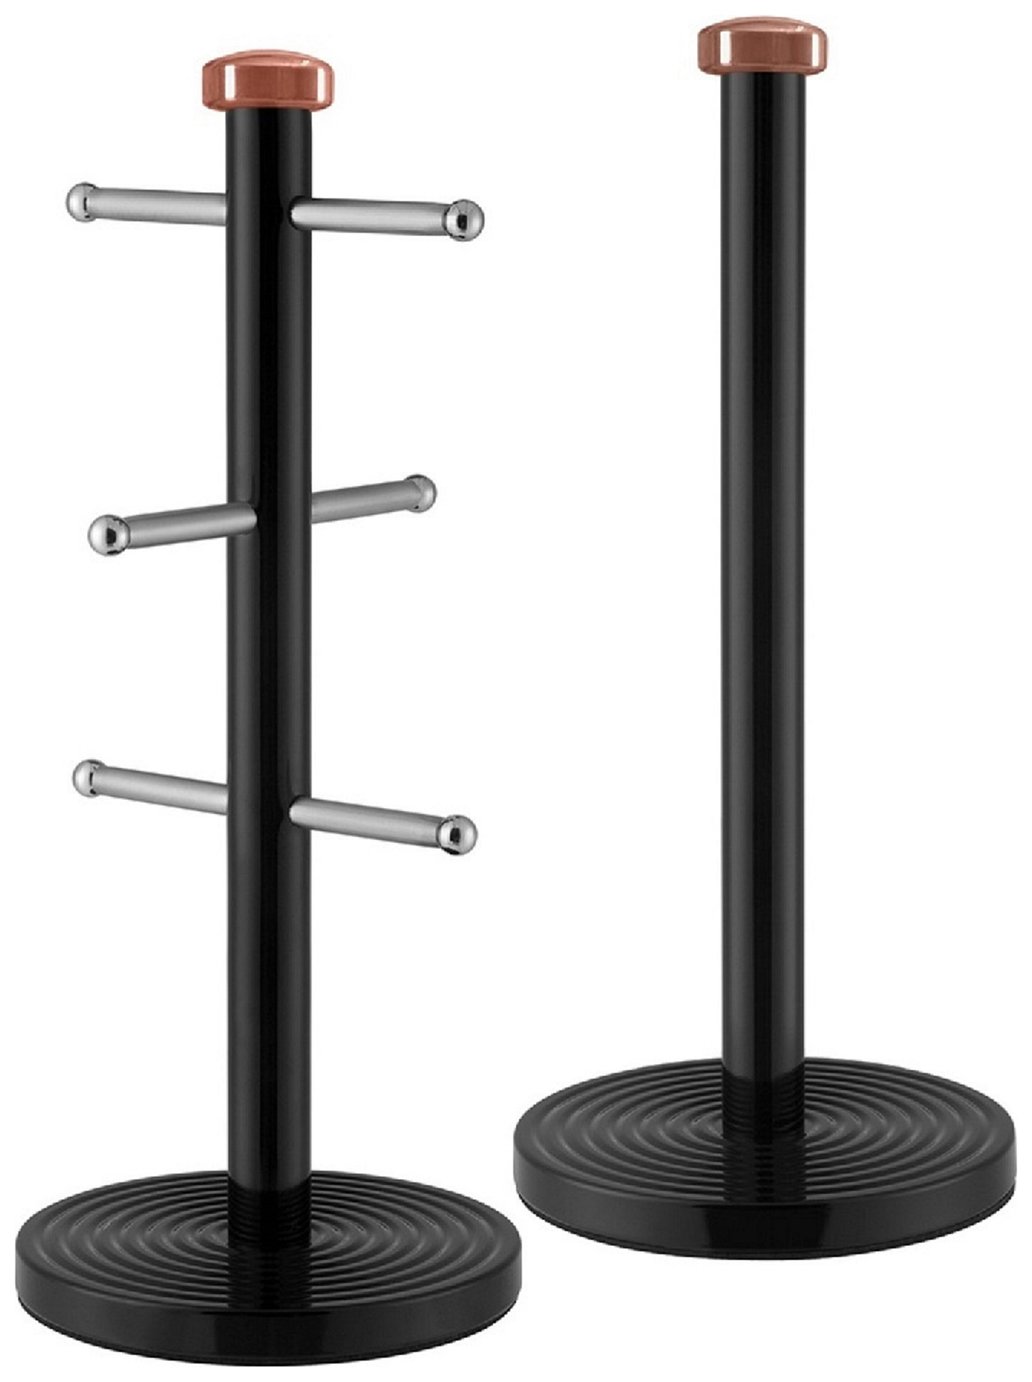 Tower Linear Towel Pole and Mug Tree - Rose Gold and Black